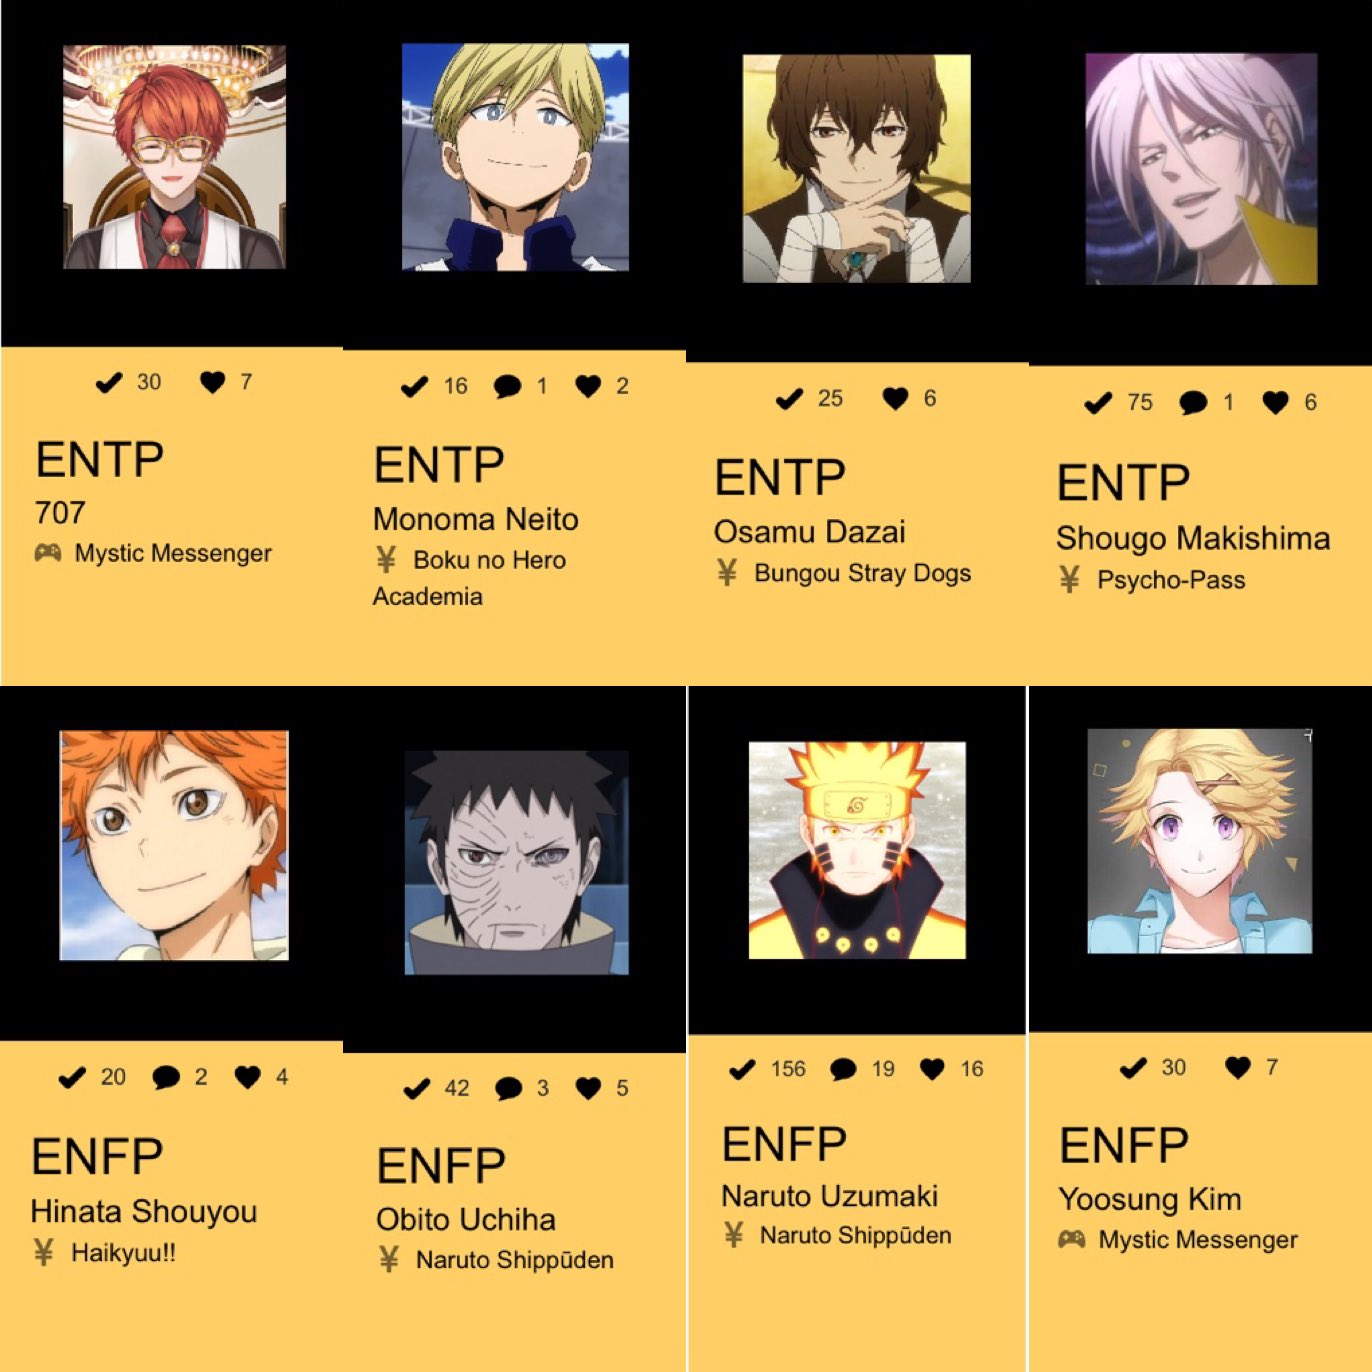 Enfp anime characters